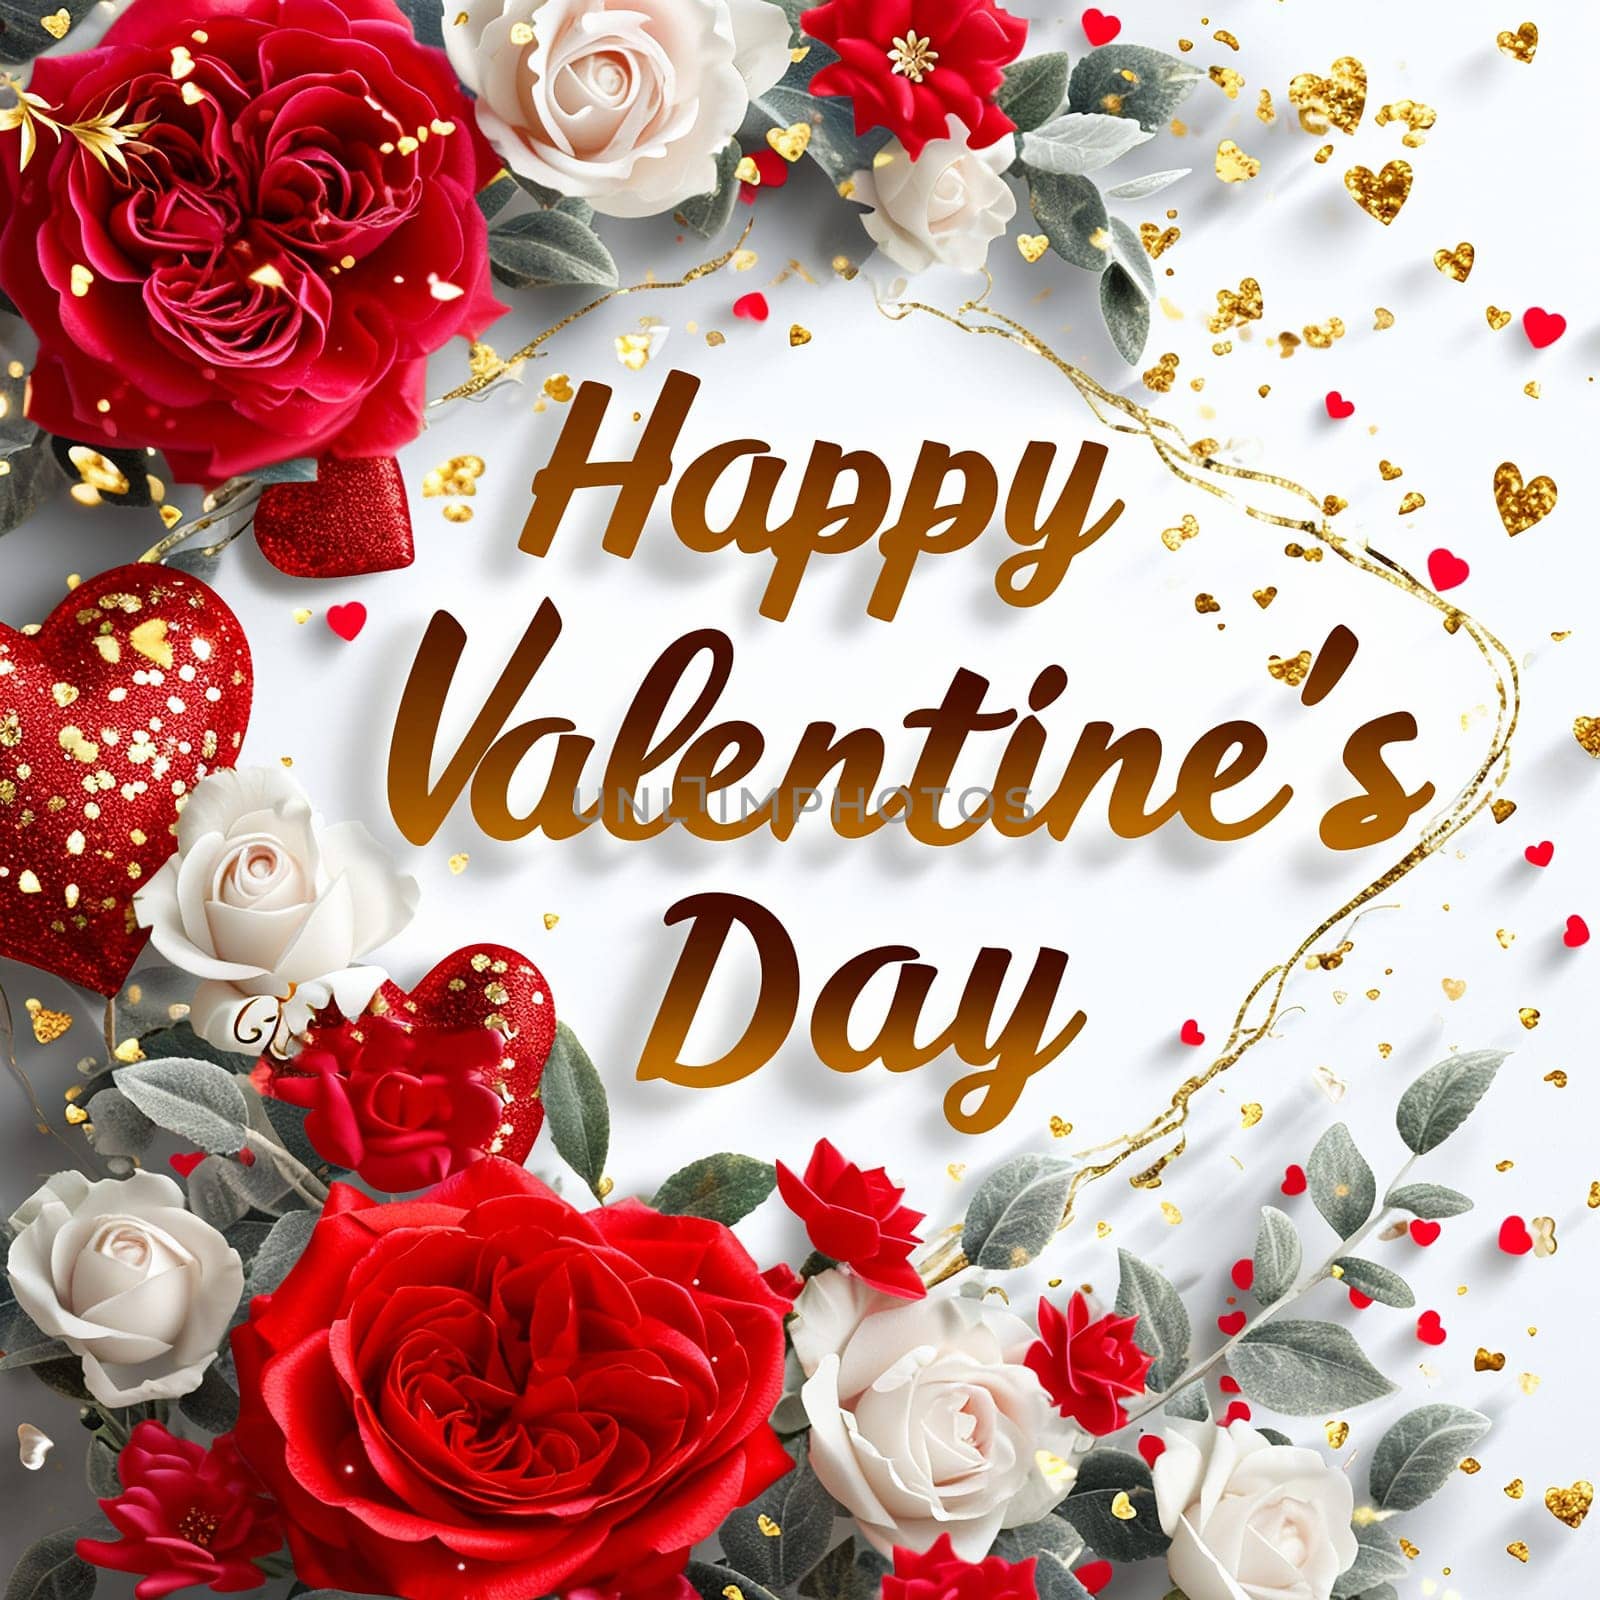 A wonderful festive background for Valentines day by NeuroSky